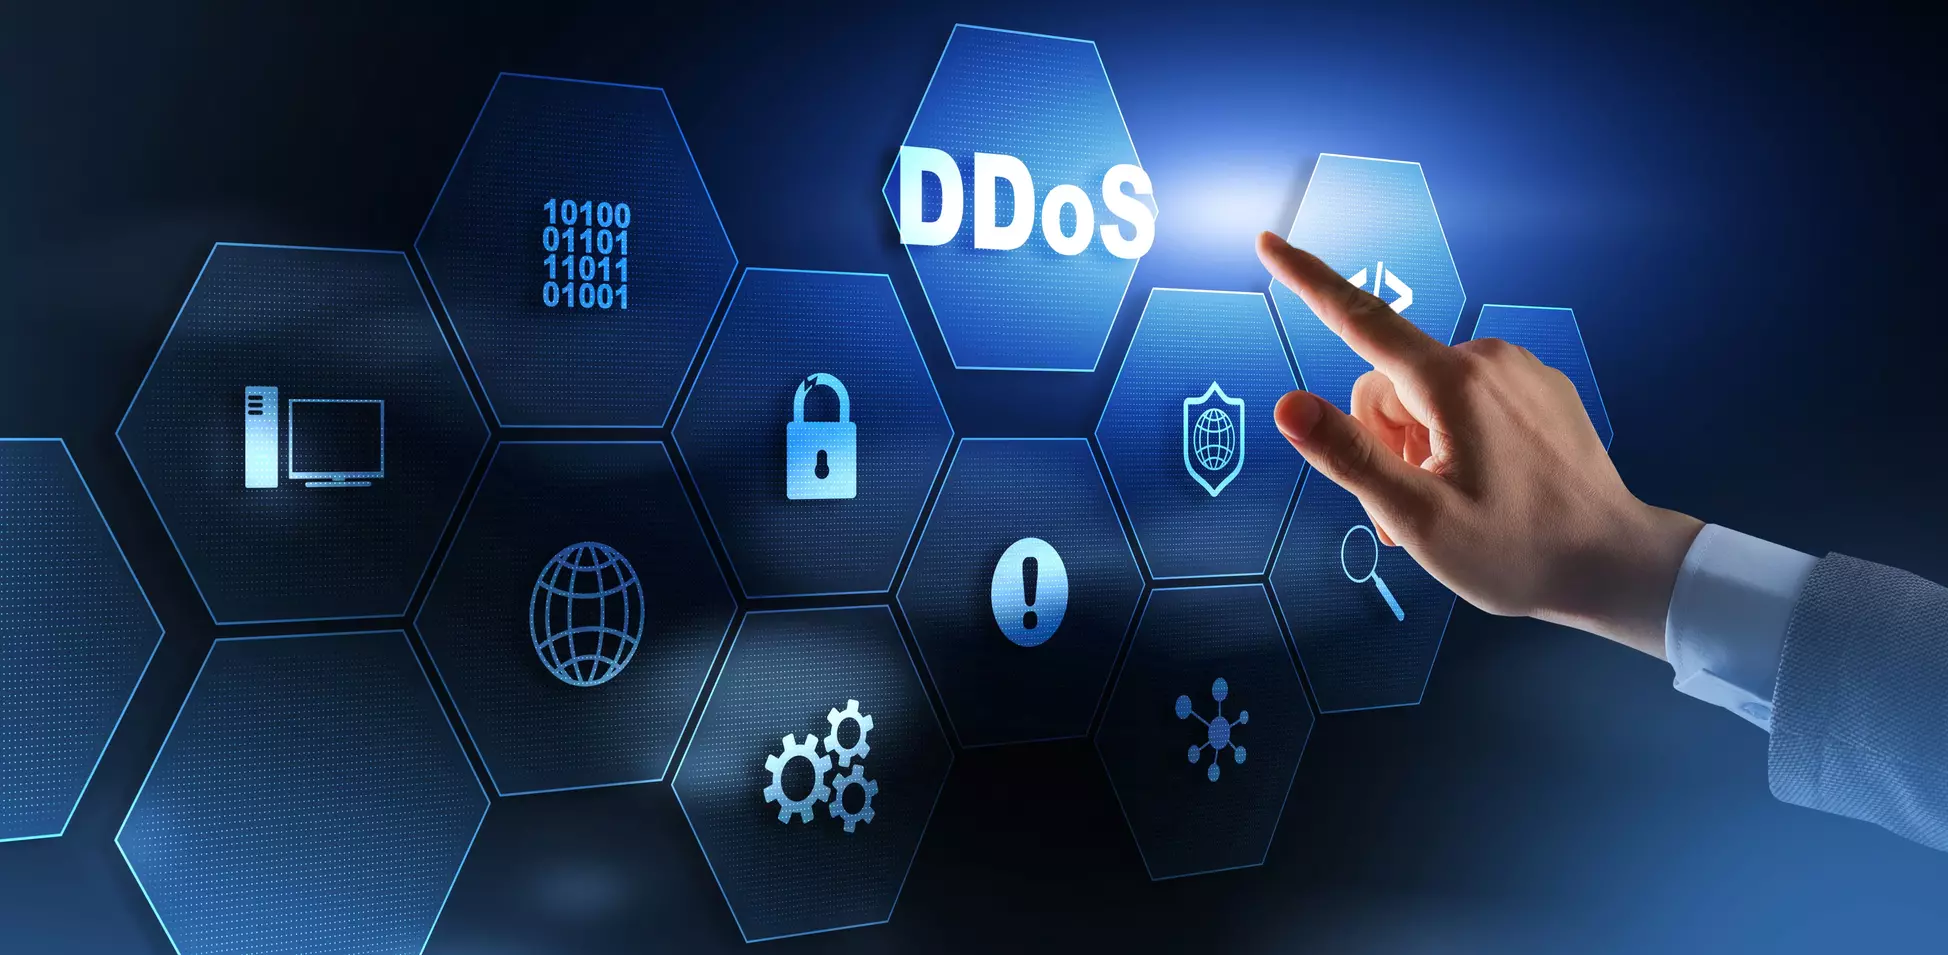 DDOS Prevention: 5 Tips You Should Know